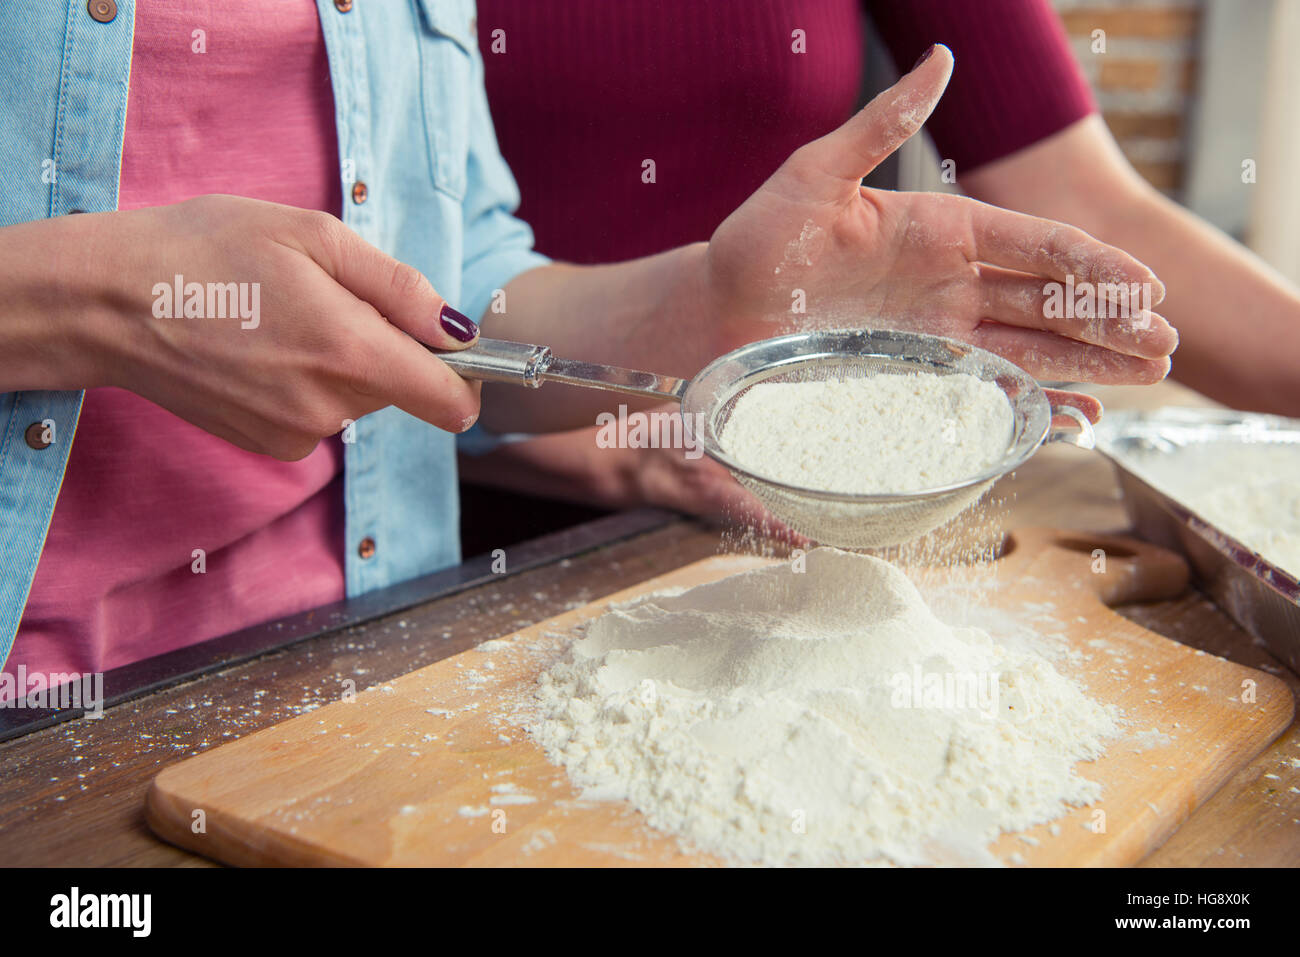 Partial view of woman sifting flour on cutting board Stock Photo